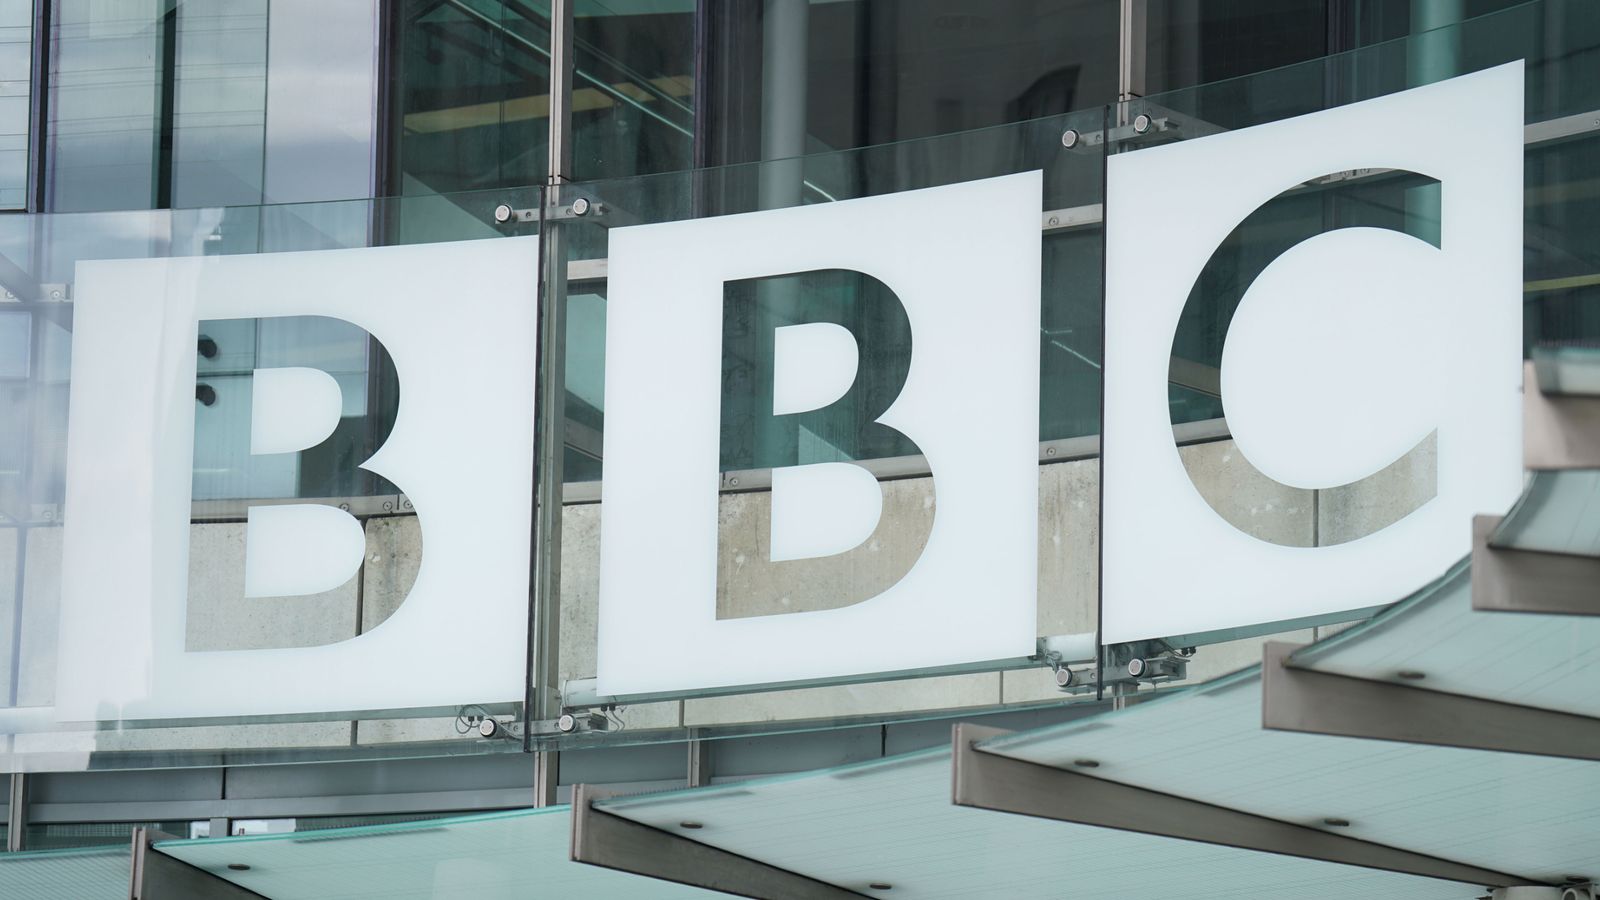 BBC presenter should only be named after 'full' investigation, says justice secretary